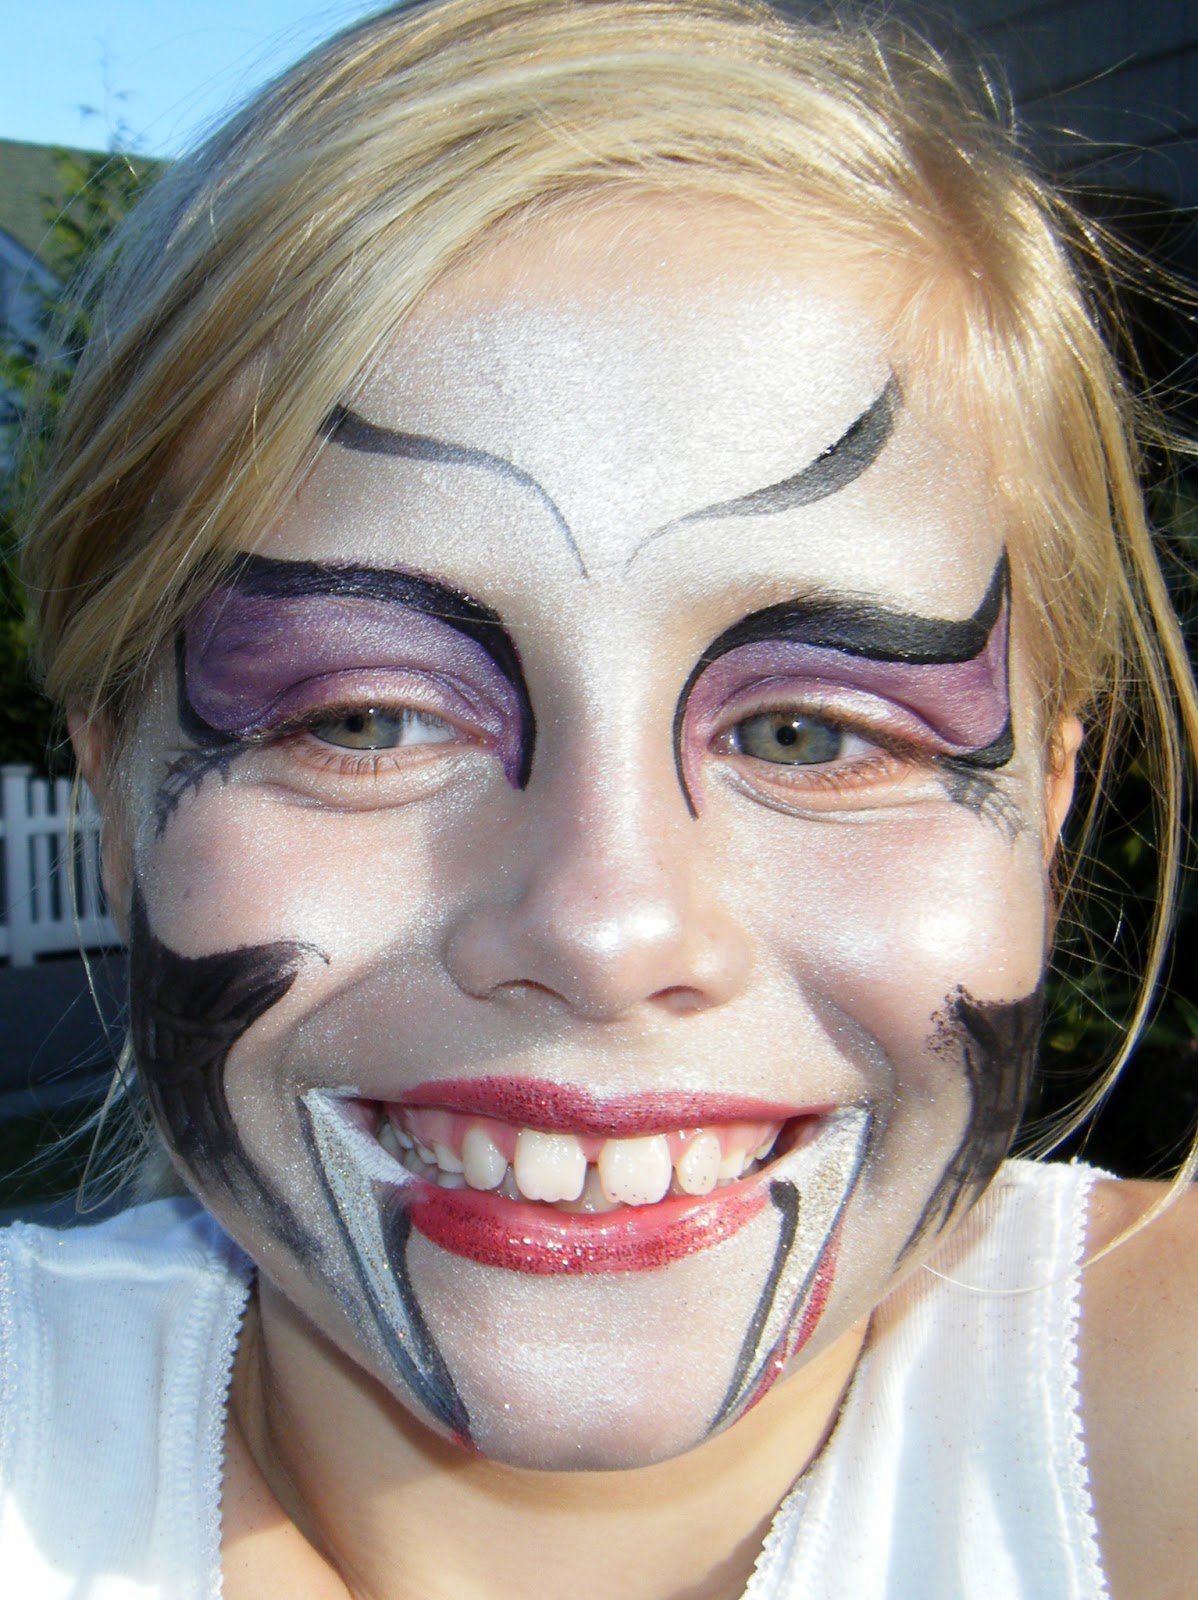 Adventures of a Face Painter: I Guess I'm the Family Face Painter!